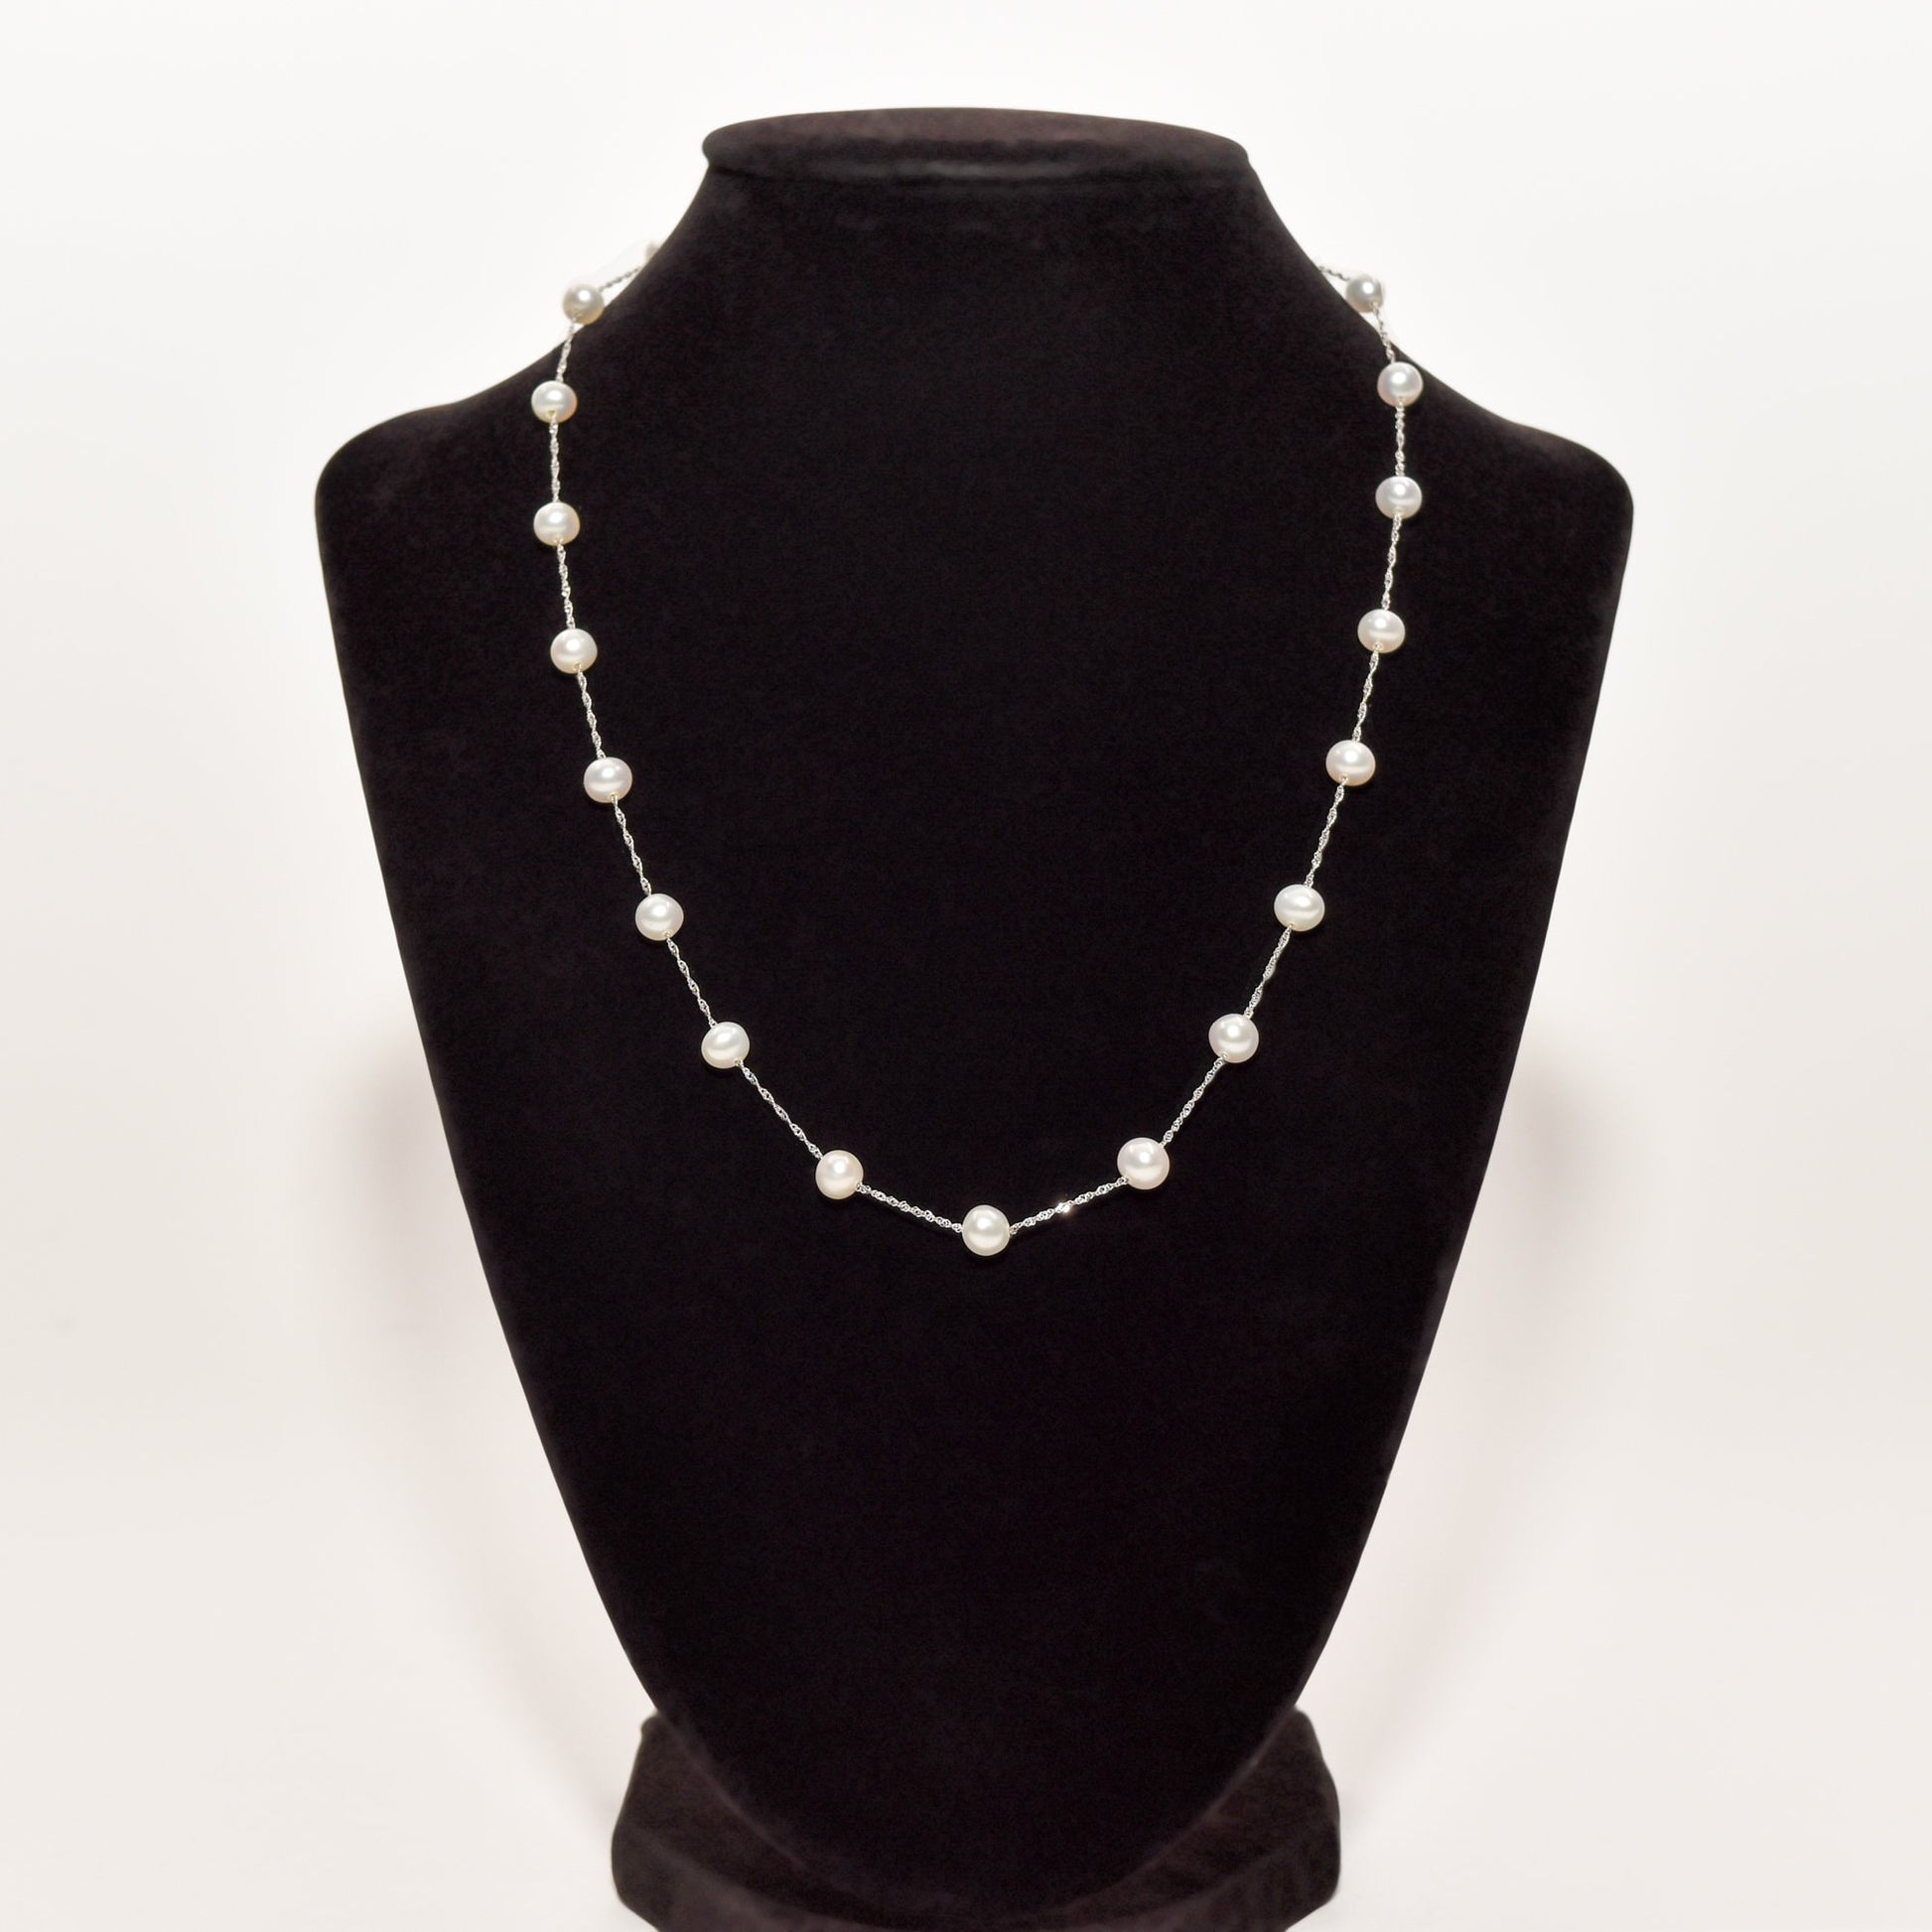 White pearl choker necklace in 14K white gold on black display stand, elegant pearl station necklace at 17.75 inches length.